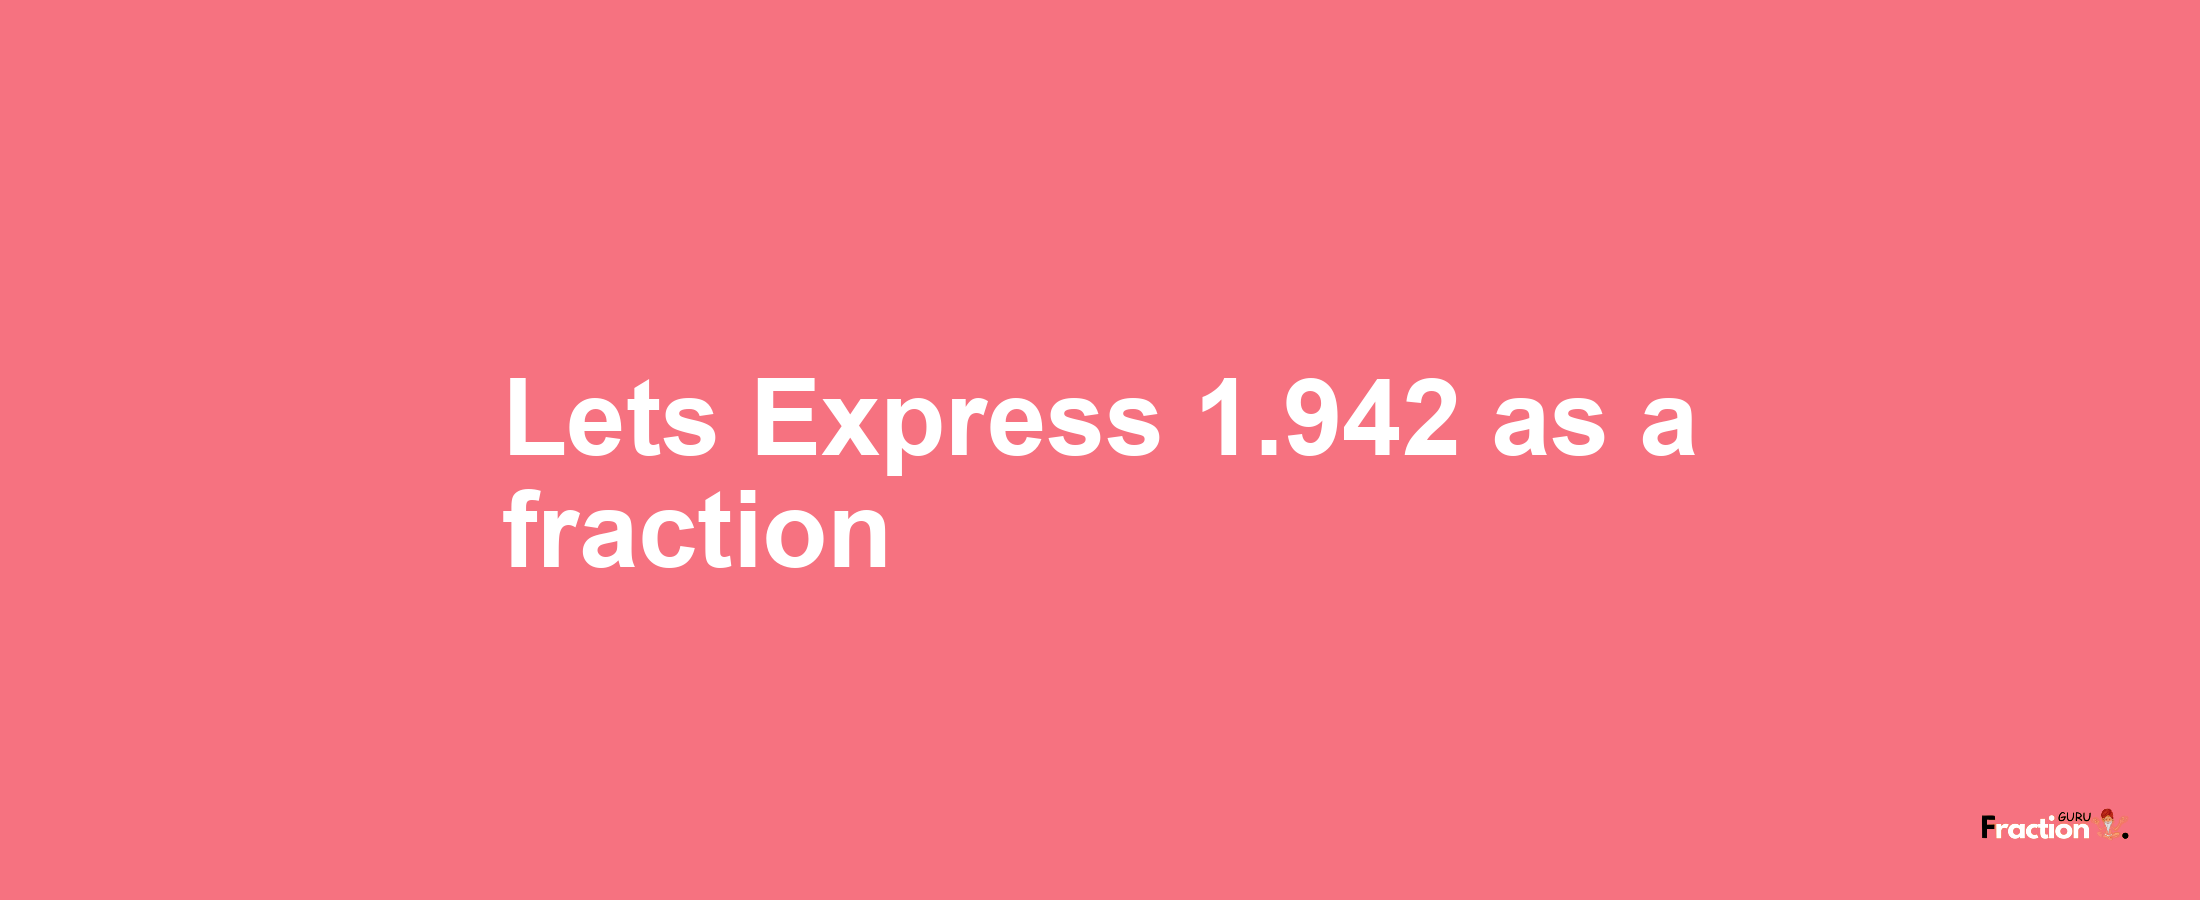 Lets Express 1.942 as afraction